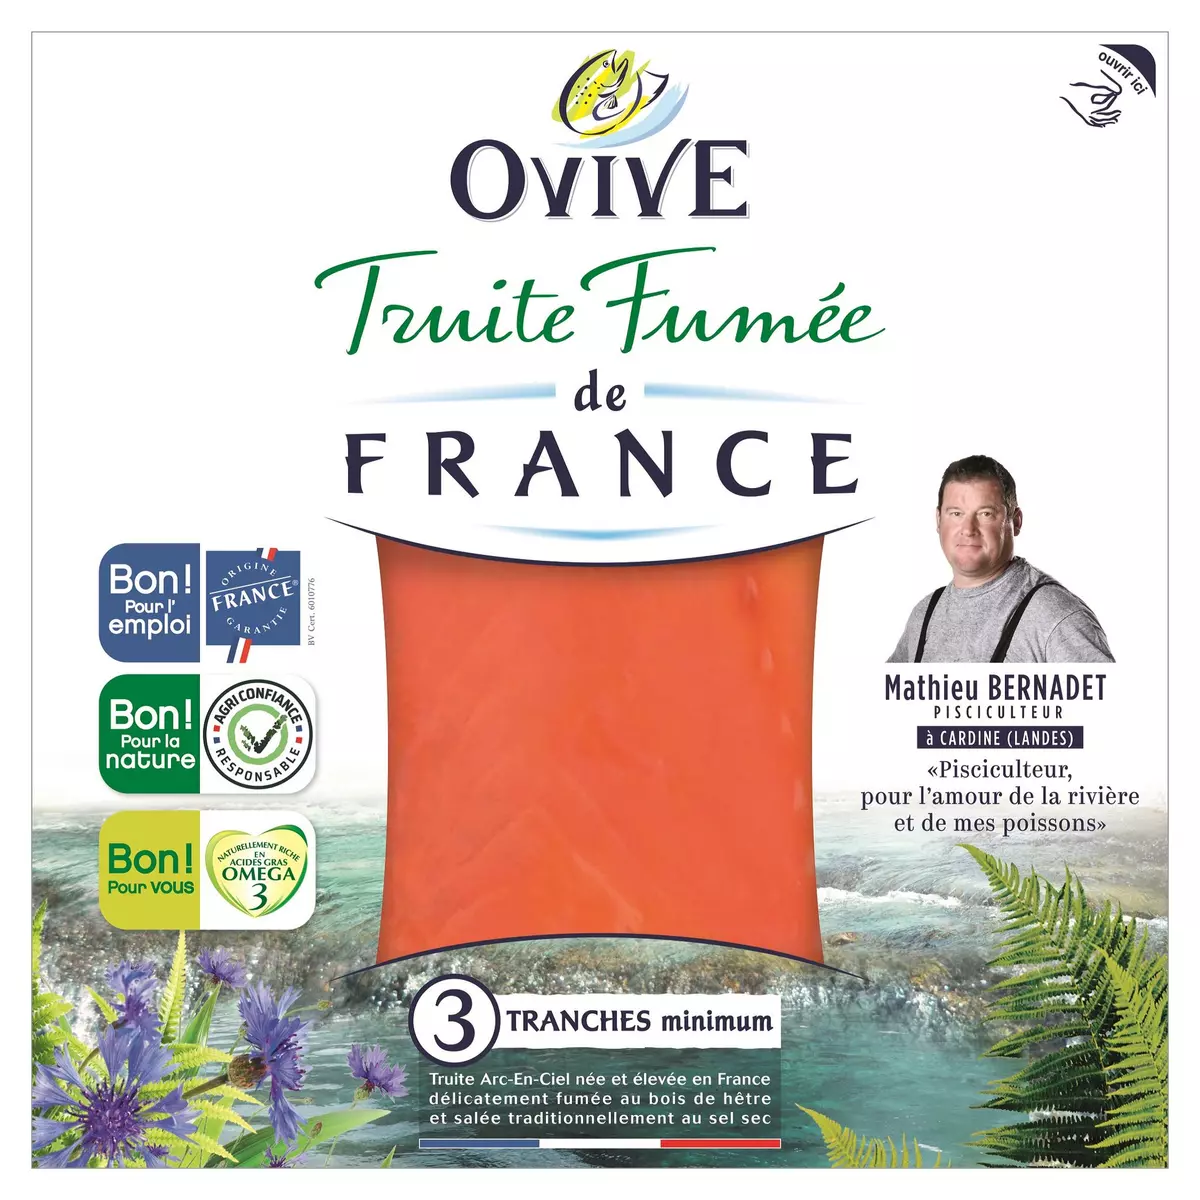 OVIVE Truite fumée 3 tranches 100g